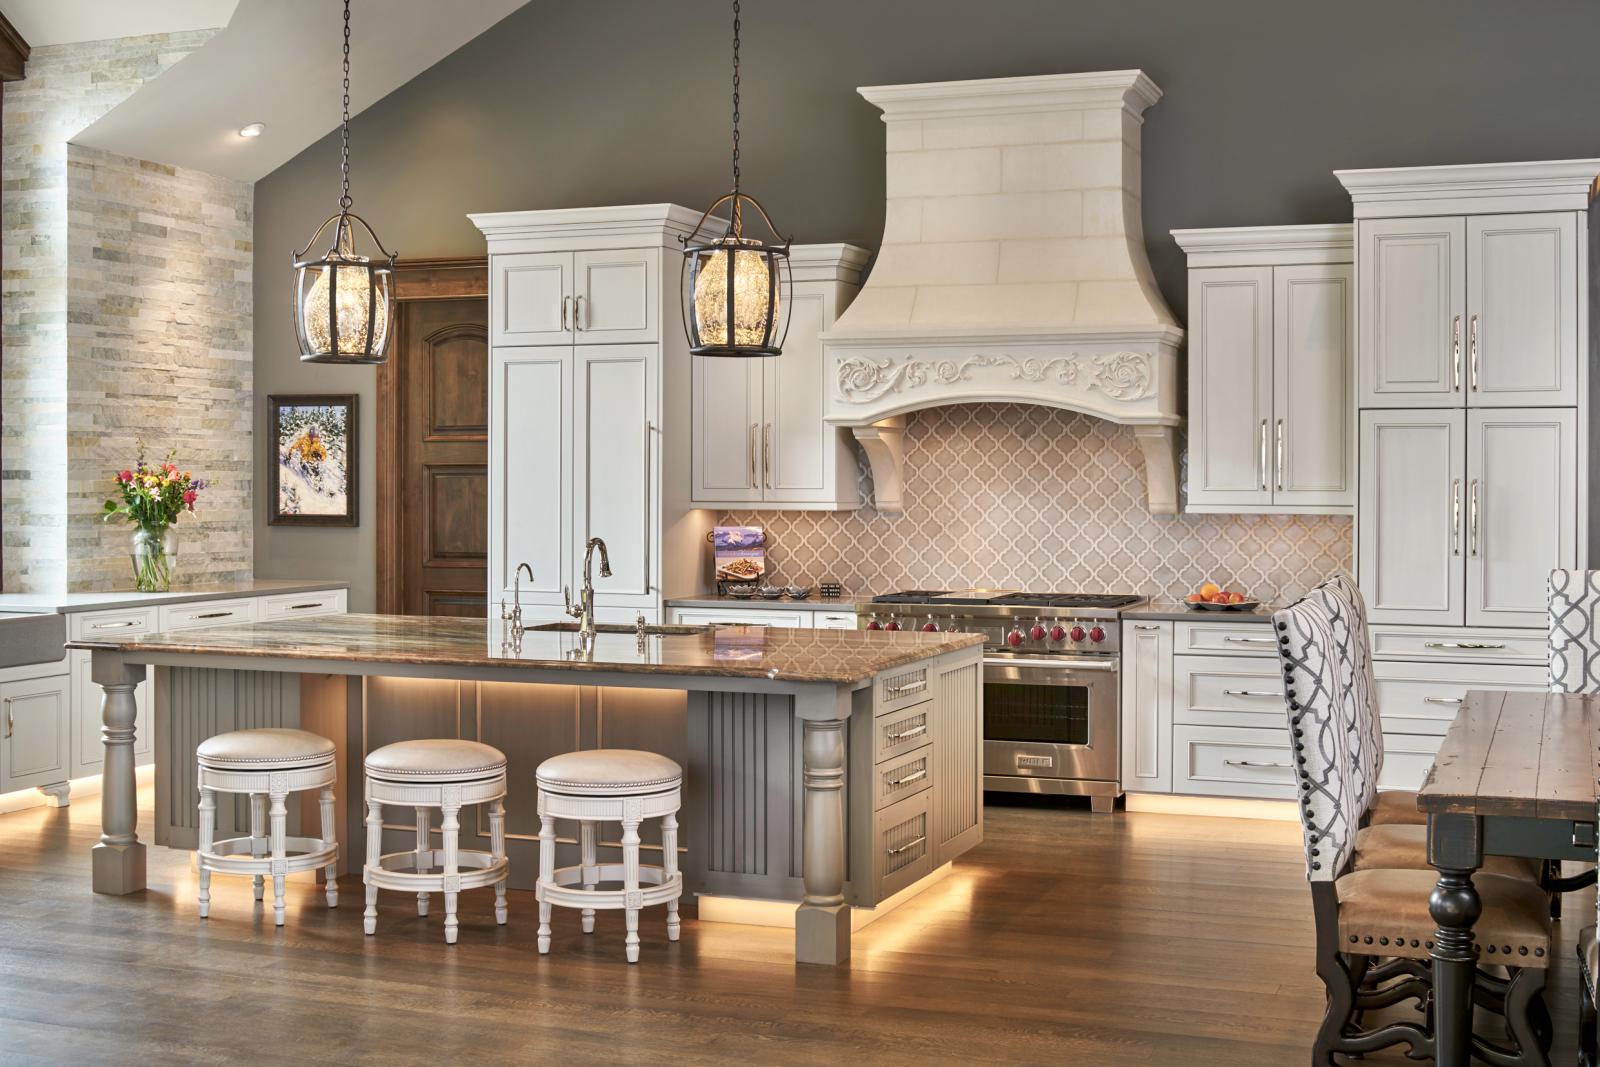 Recent Projects - Kitchens | YK Stone Center | Denver Colorado